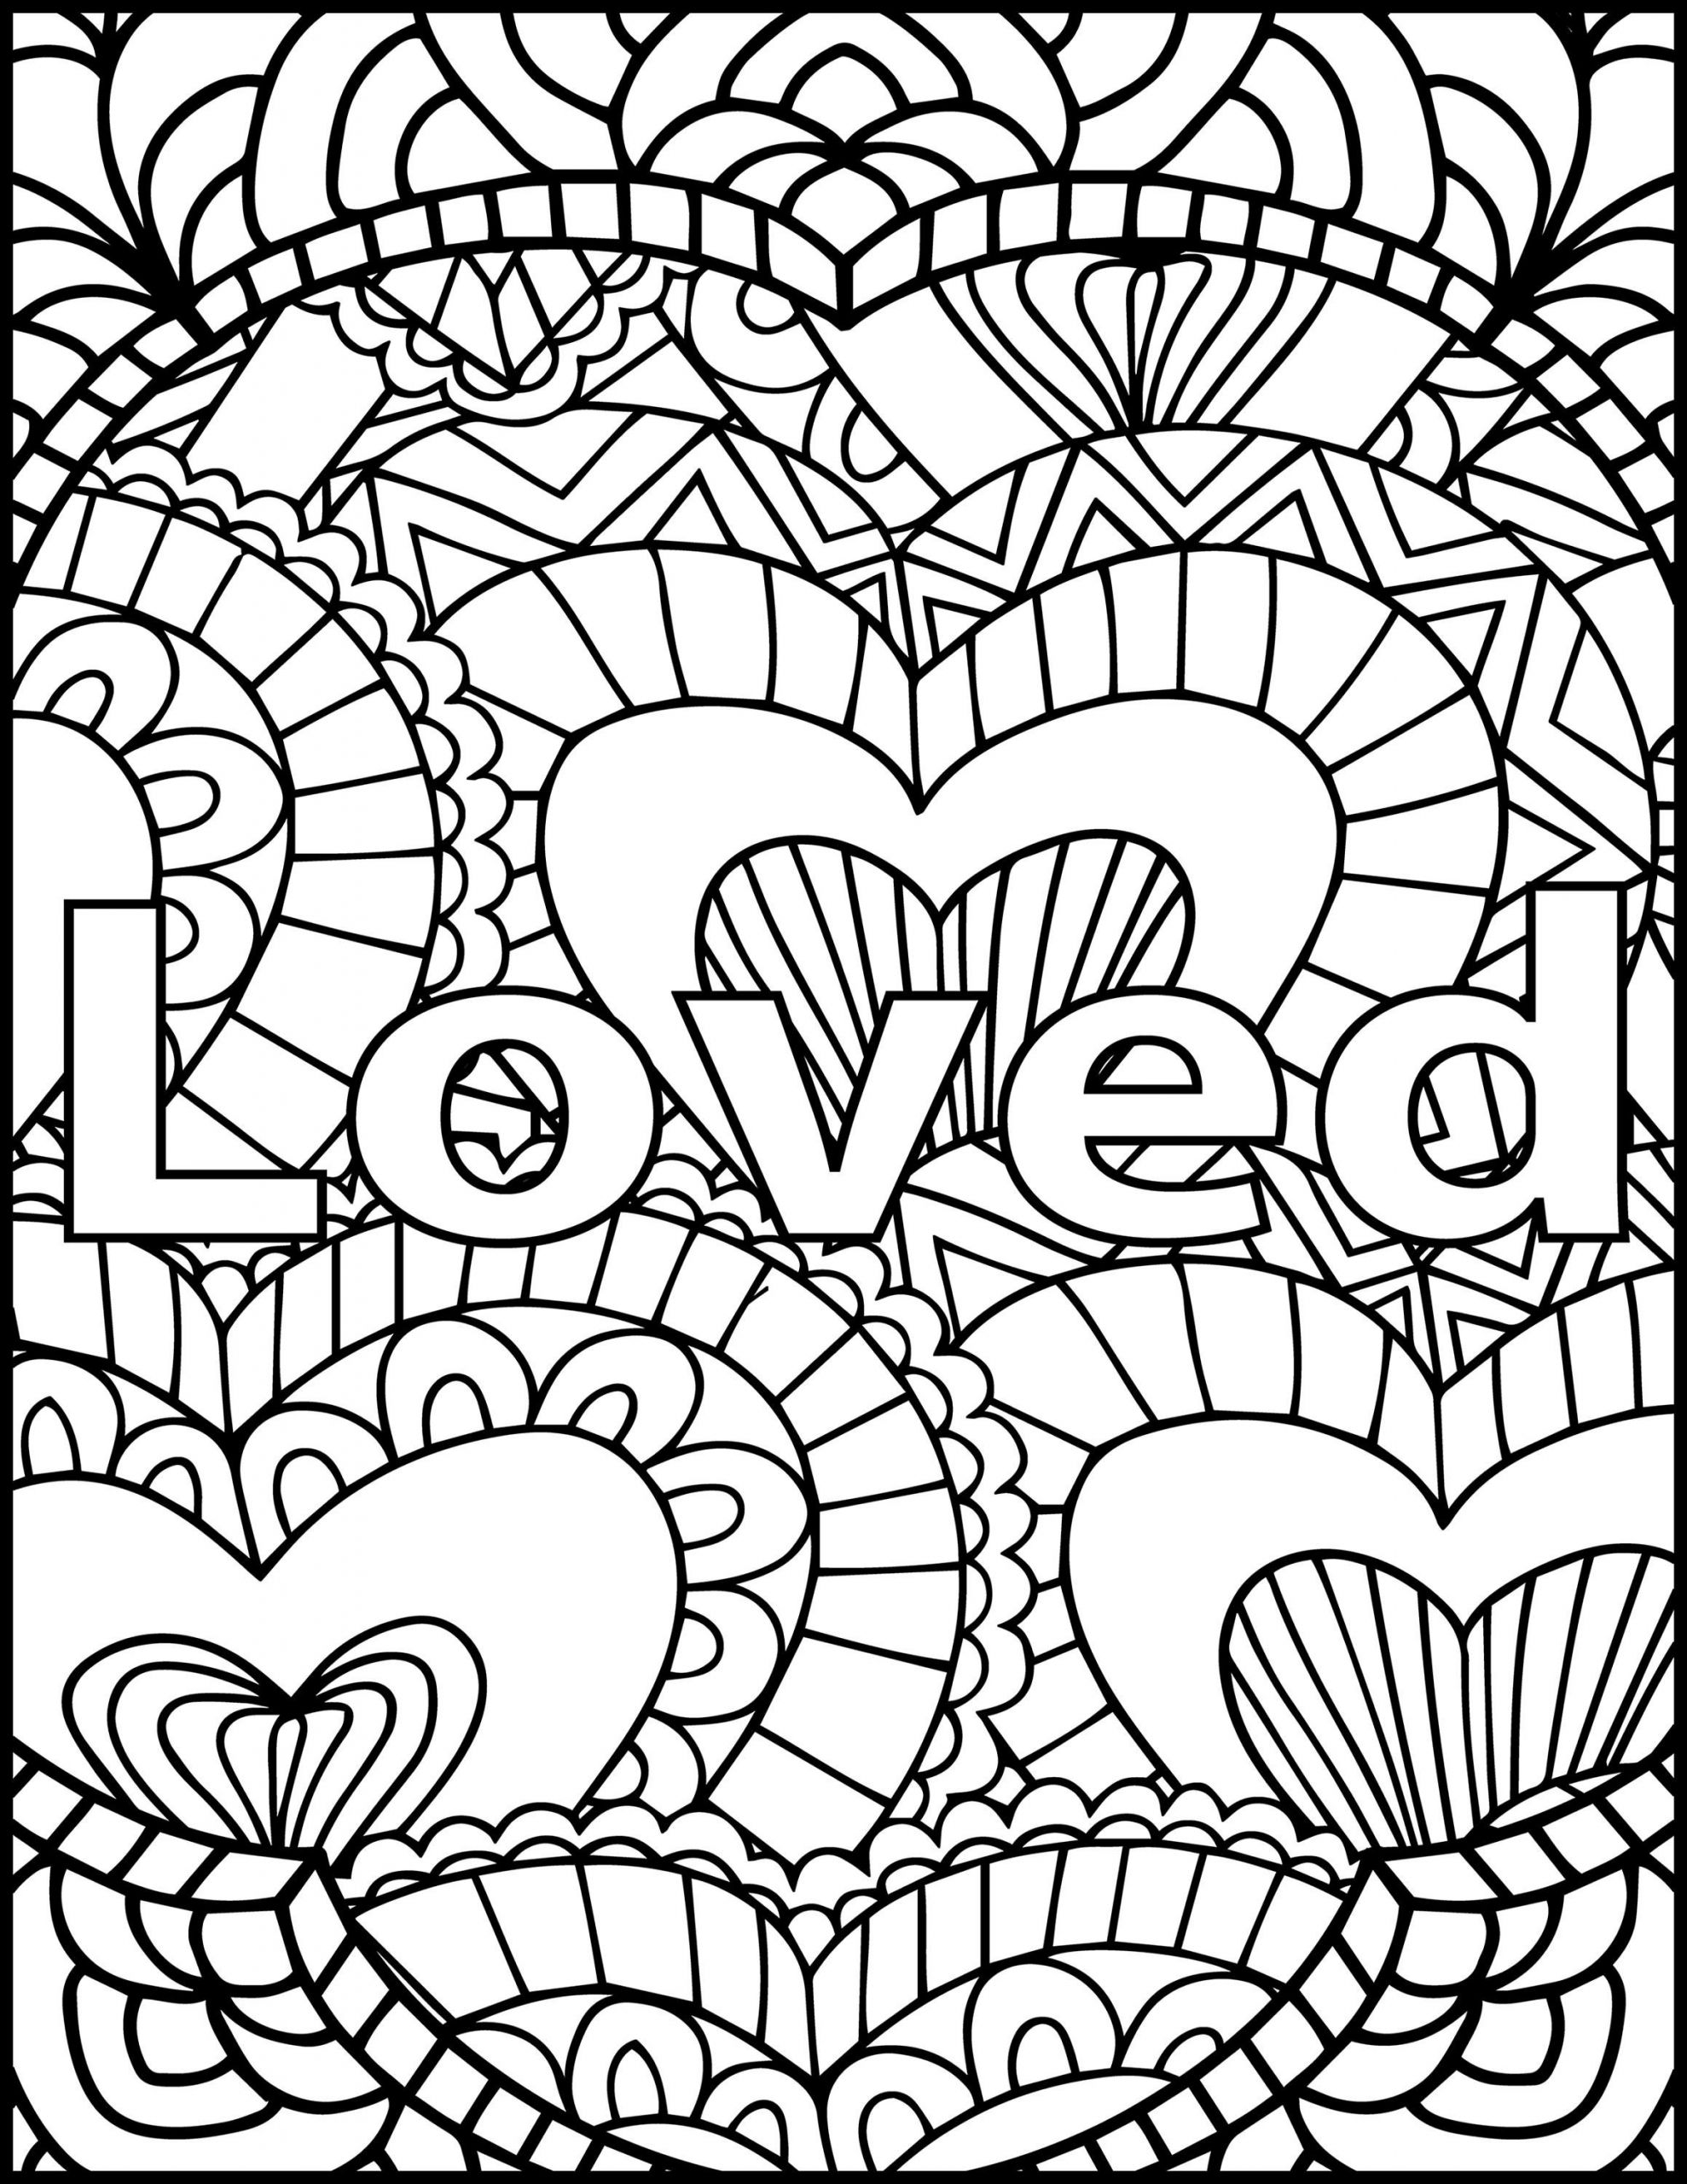 Printable Free Coloring Pages For Adults
 I Am Loved Adult Coloring Page Inspiring Message Coloring